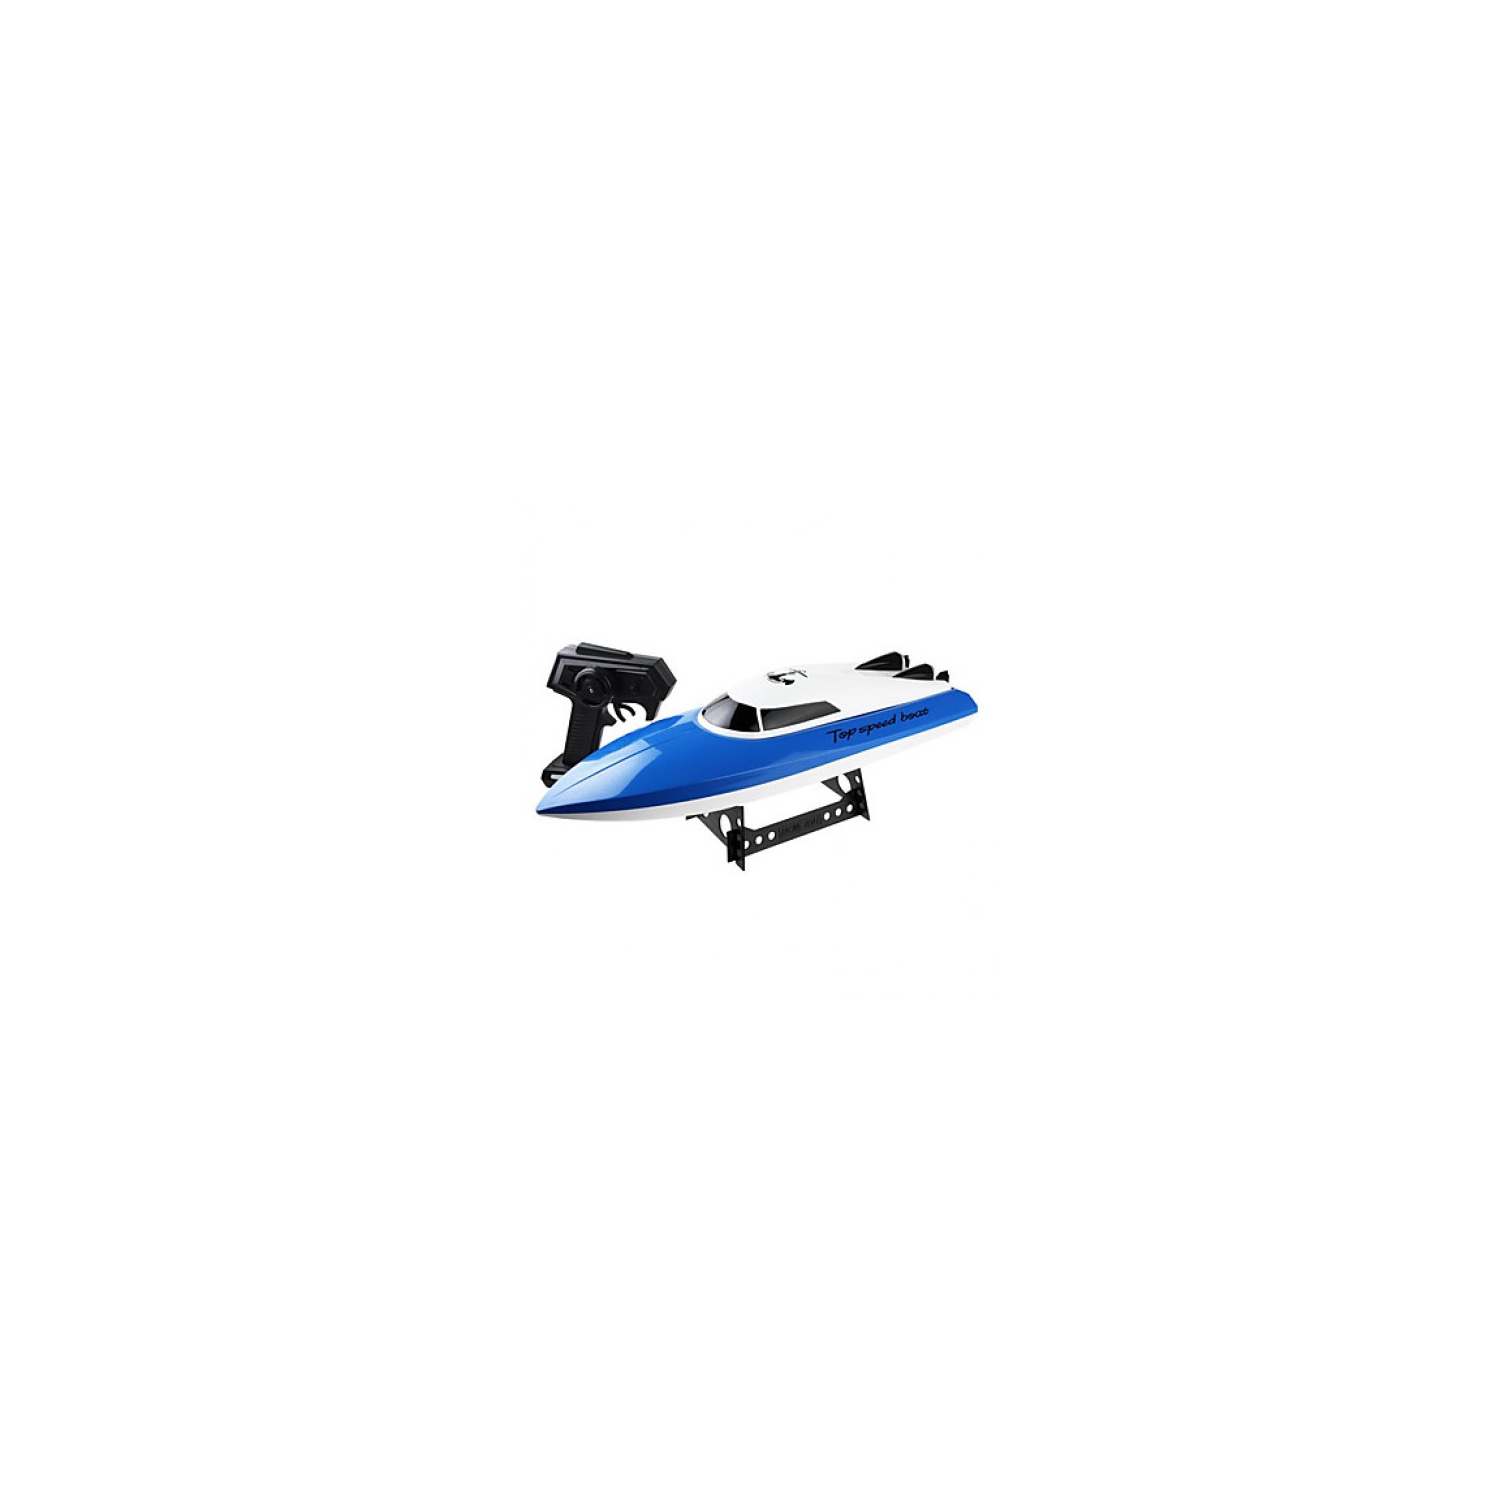 2.4G 1:10 Scale Remote 4 Chanel Control High Speed Racing Boat 801(Blue)